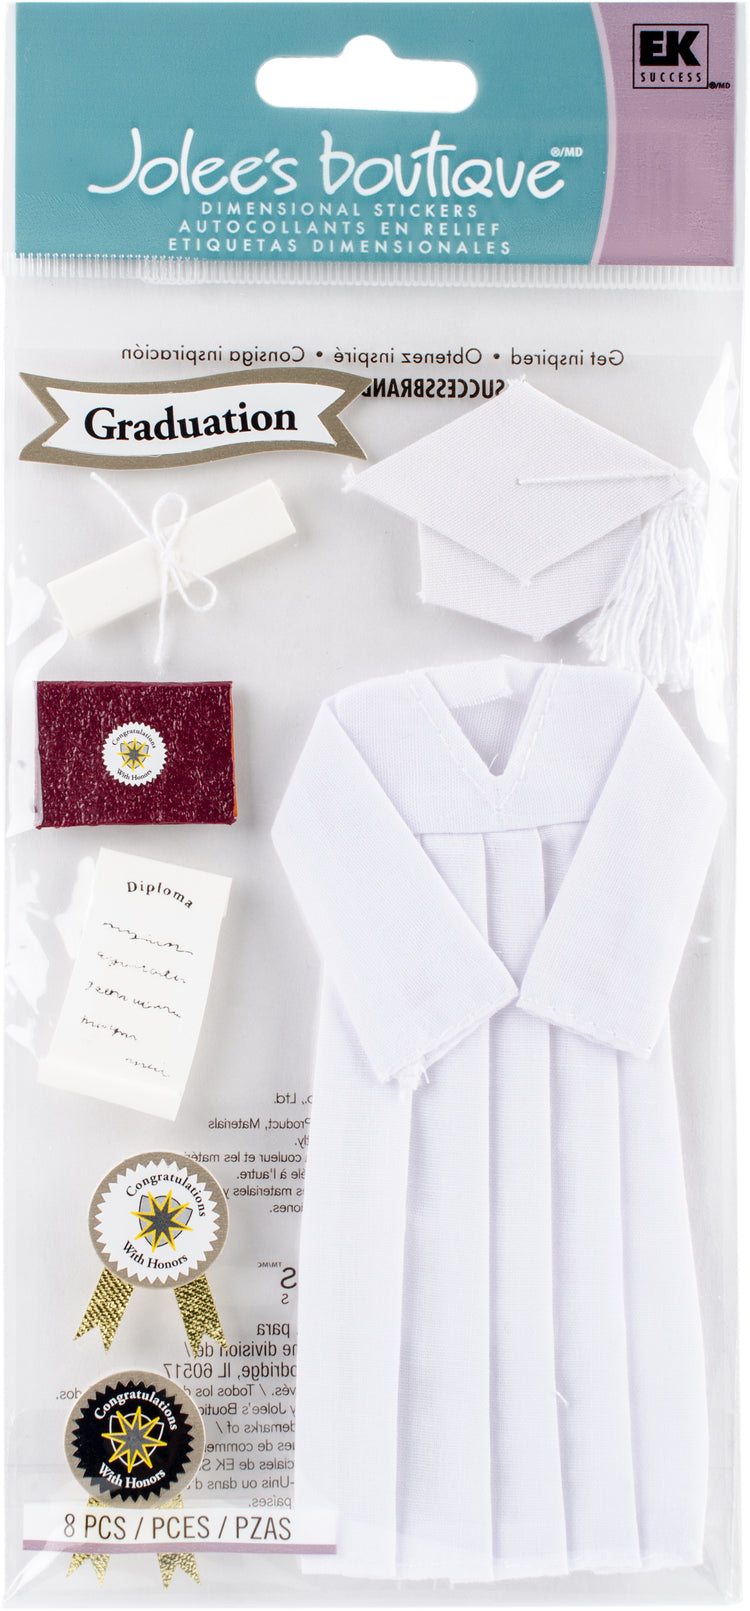 Jolee's Boutique Cap & Gown White Dimensional Stickers